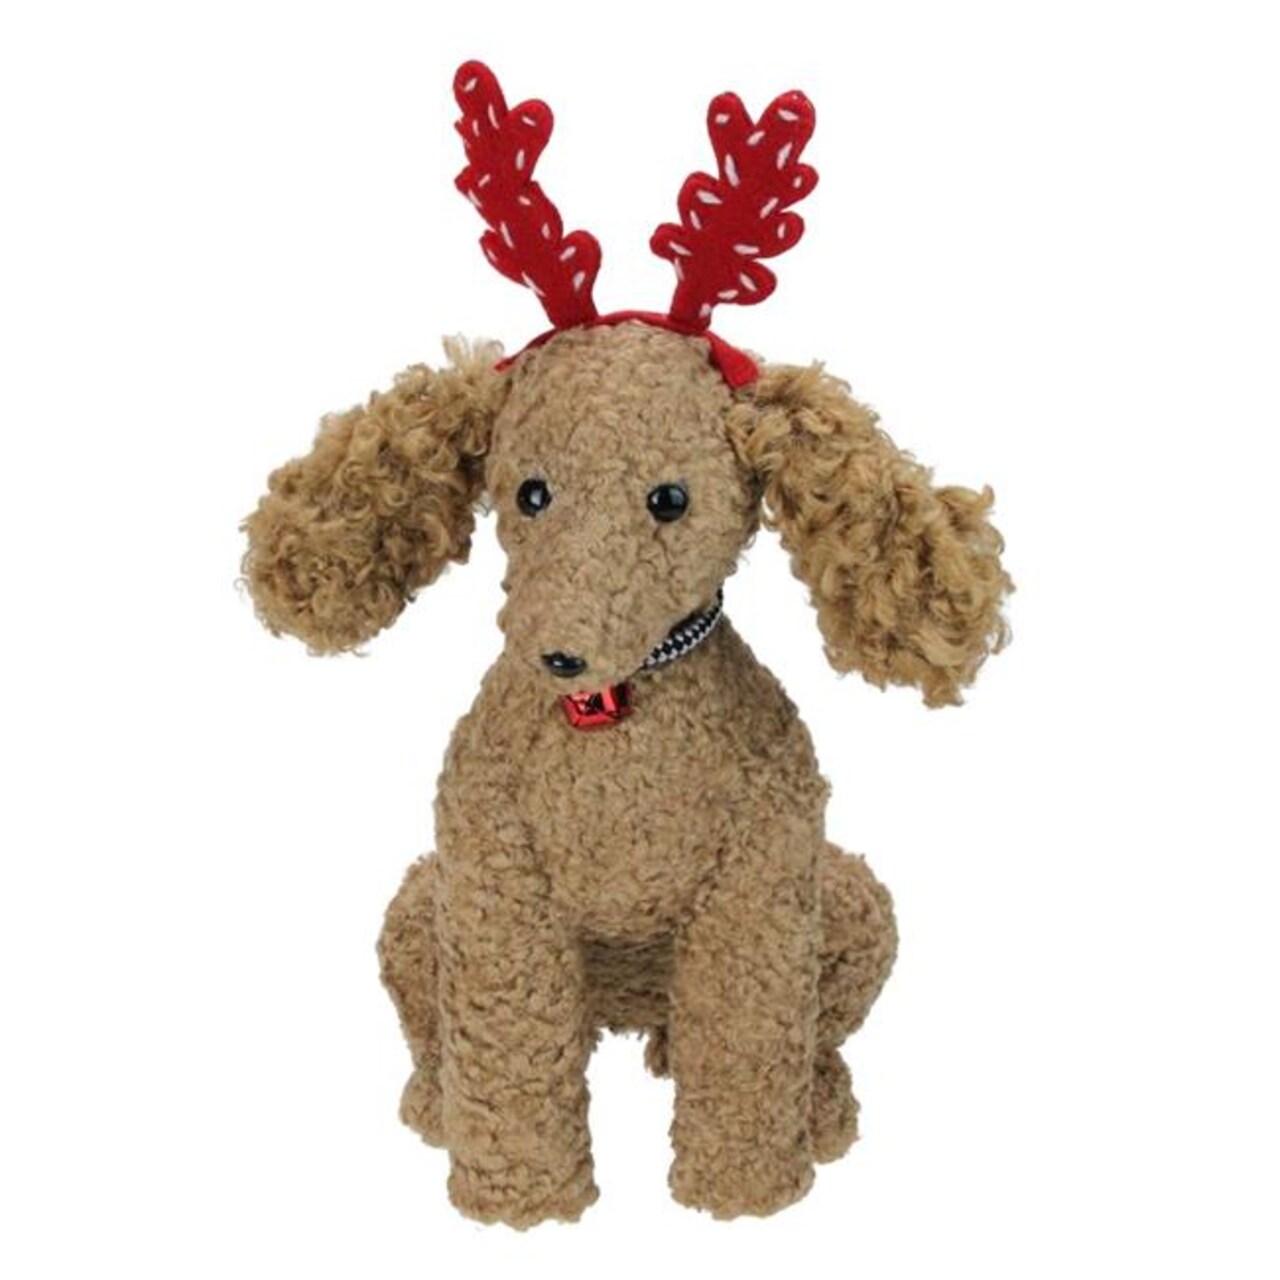 Northlight 32913485 14.5 in. Plush Tan Bichon Frise Puppy Dog with Red Antlers Christmas Decoration